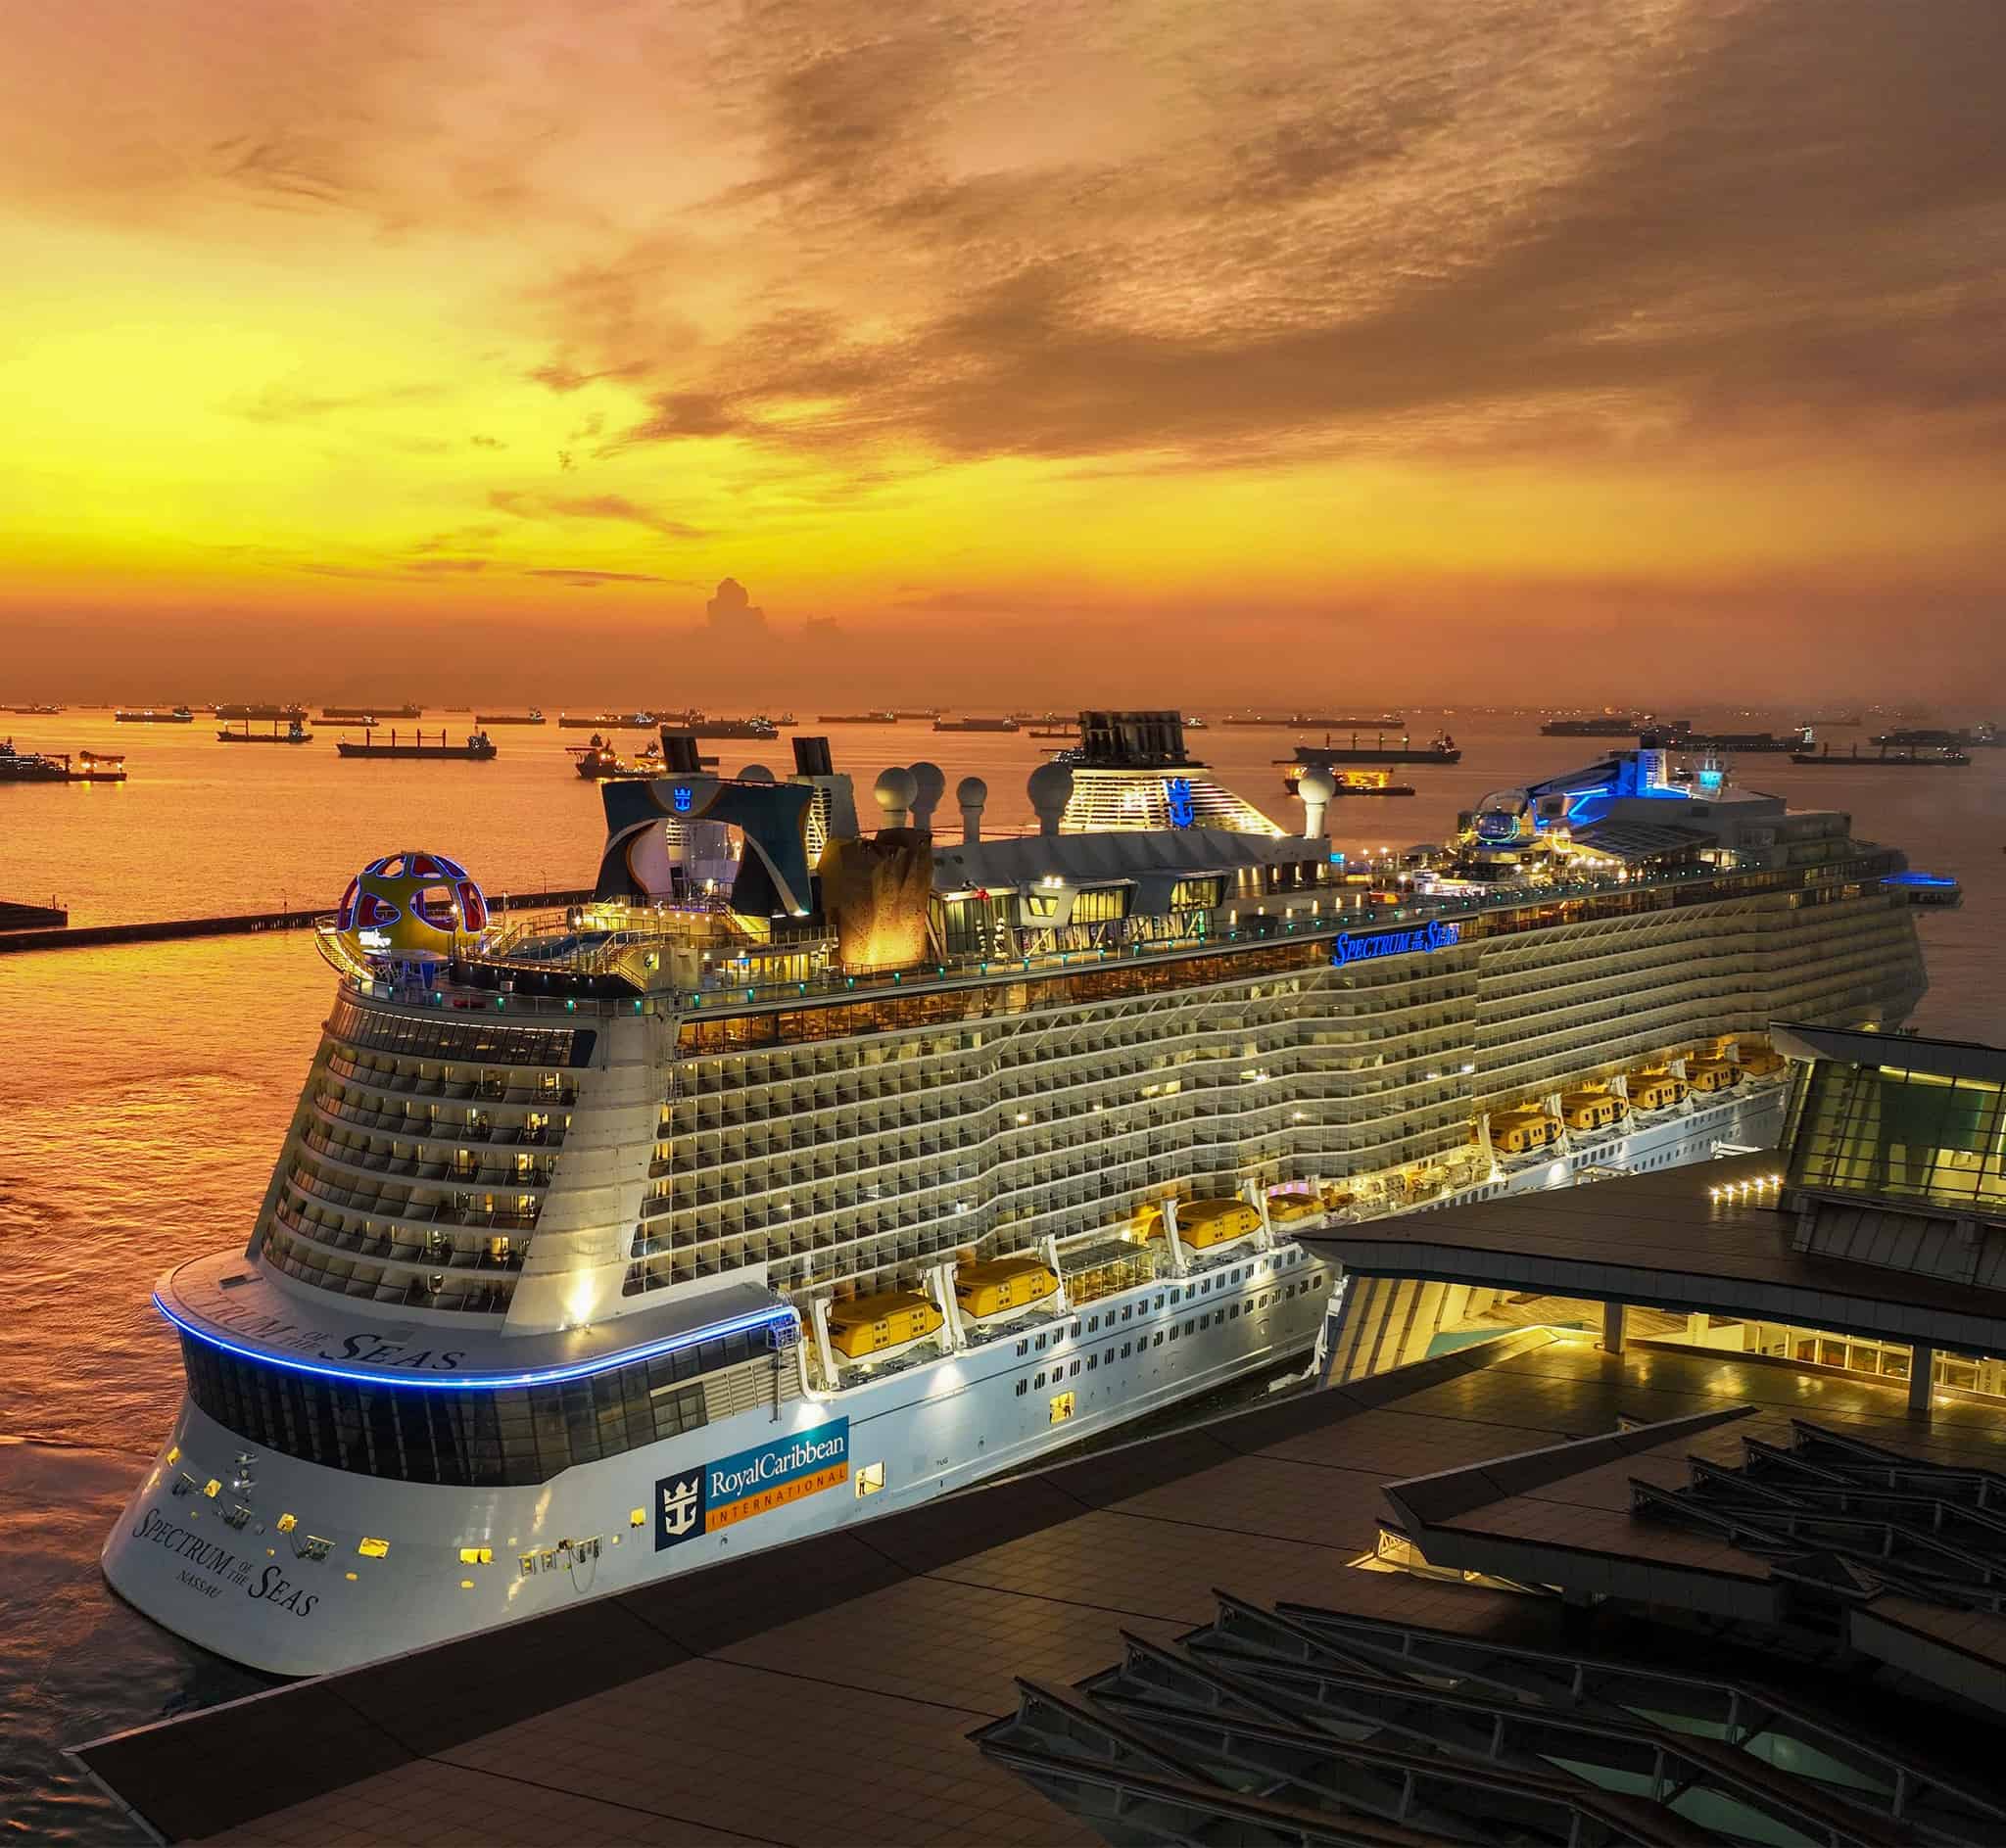 How to Apply for a Vietnam Visa on Spectrum of the Seas Cruise